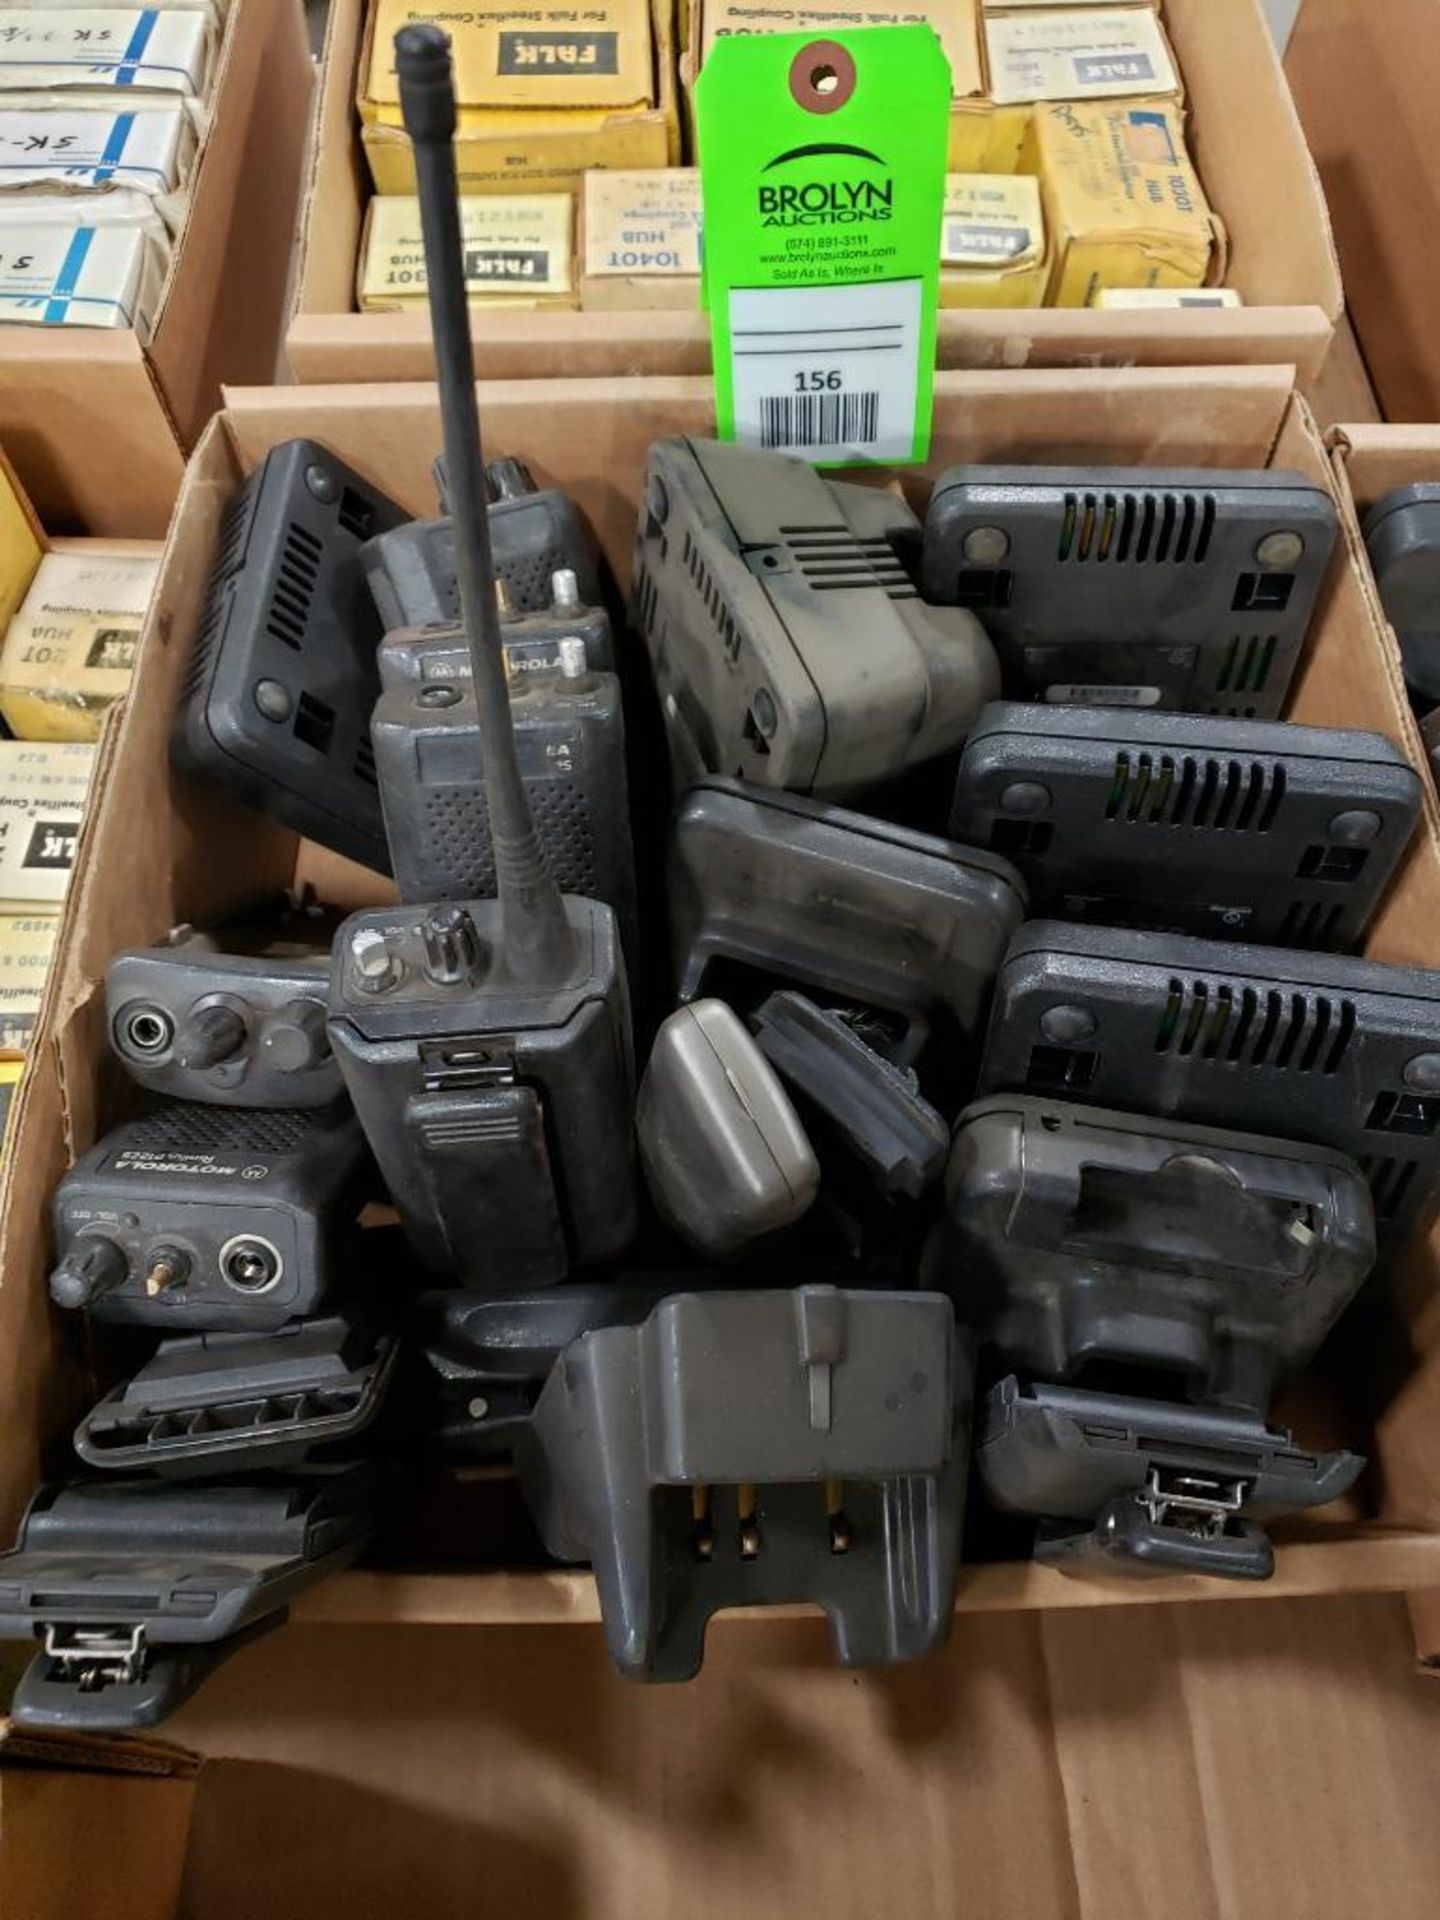 Assorted walkie talkies and accessories.